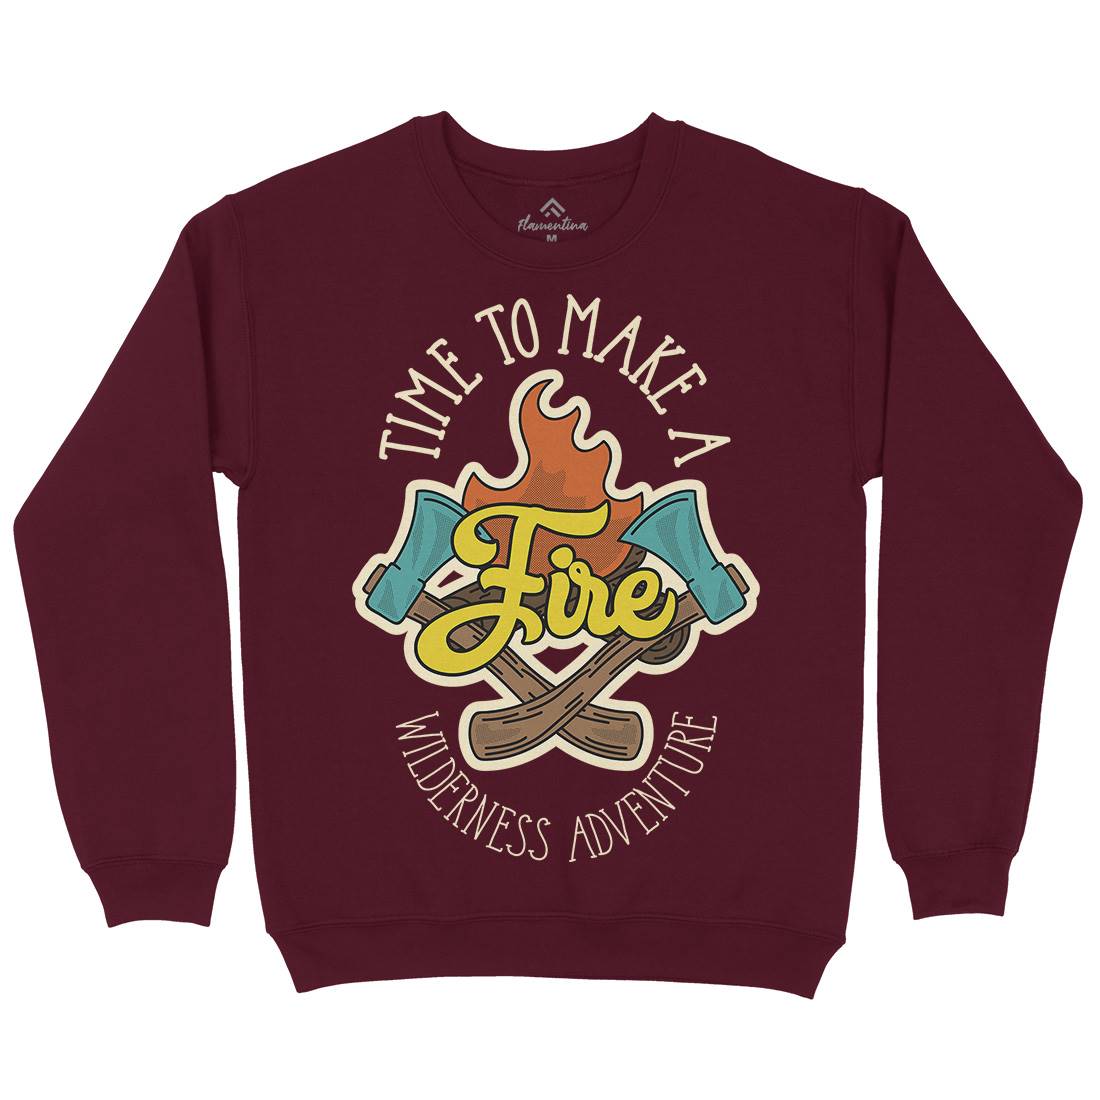 Time To Make Fire Mens Crew Neck Sweatshirt Nature D992